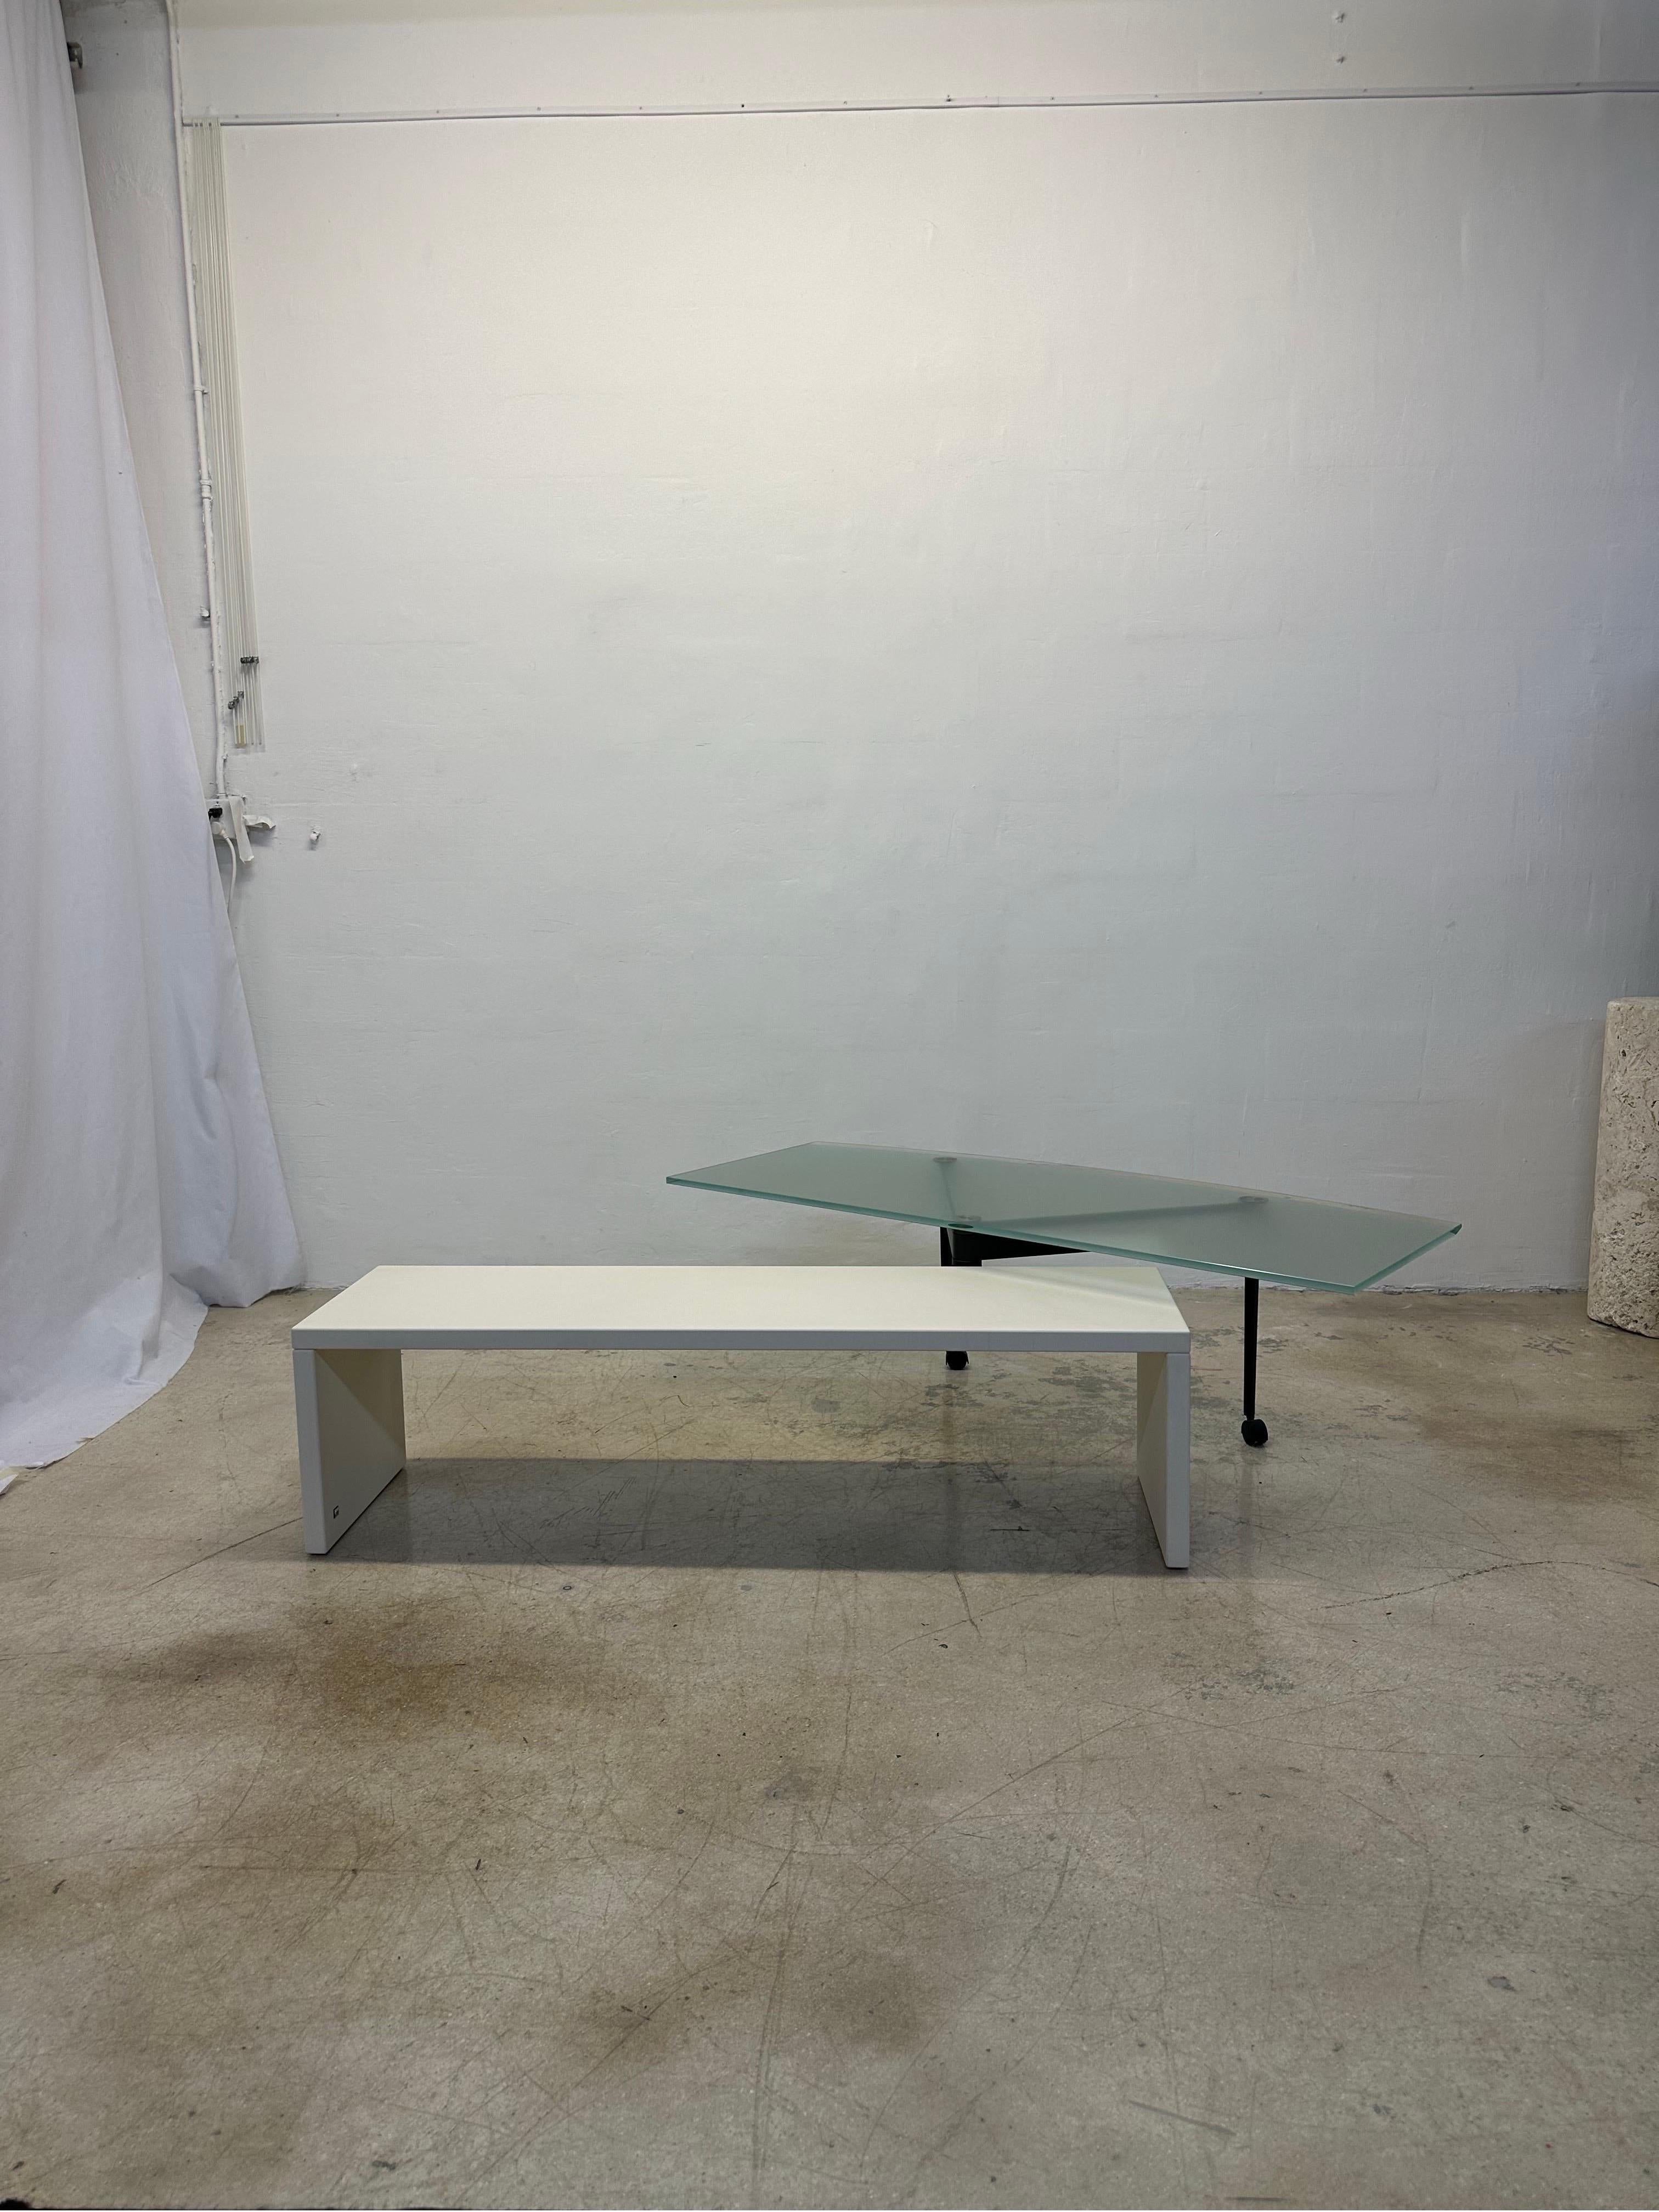 B&b Italia 360 Degree Rotating Glass Top Coffee Table, 1990s In Good Condition For Sale In Miami, FL